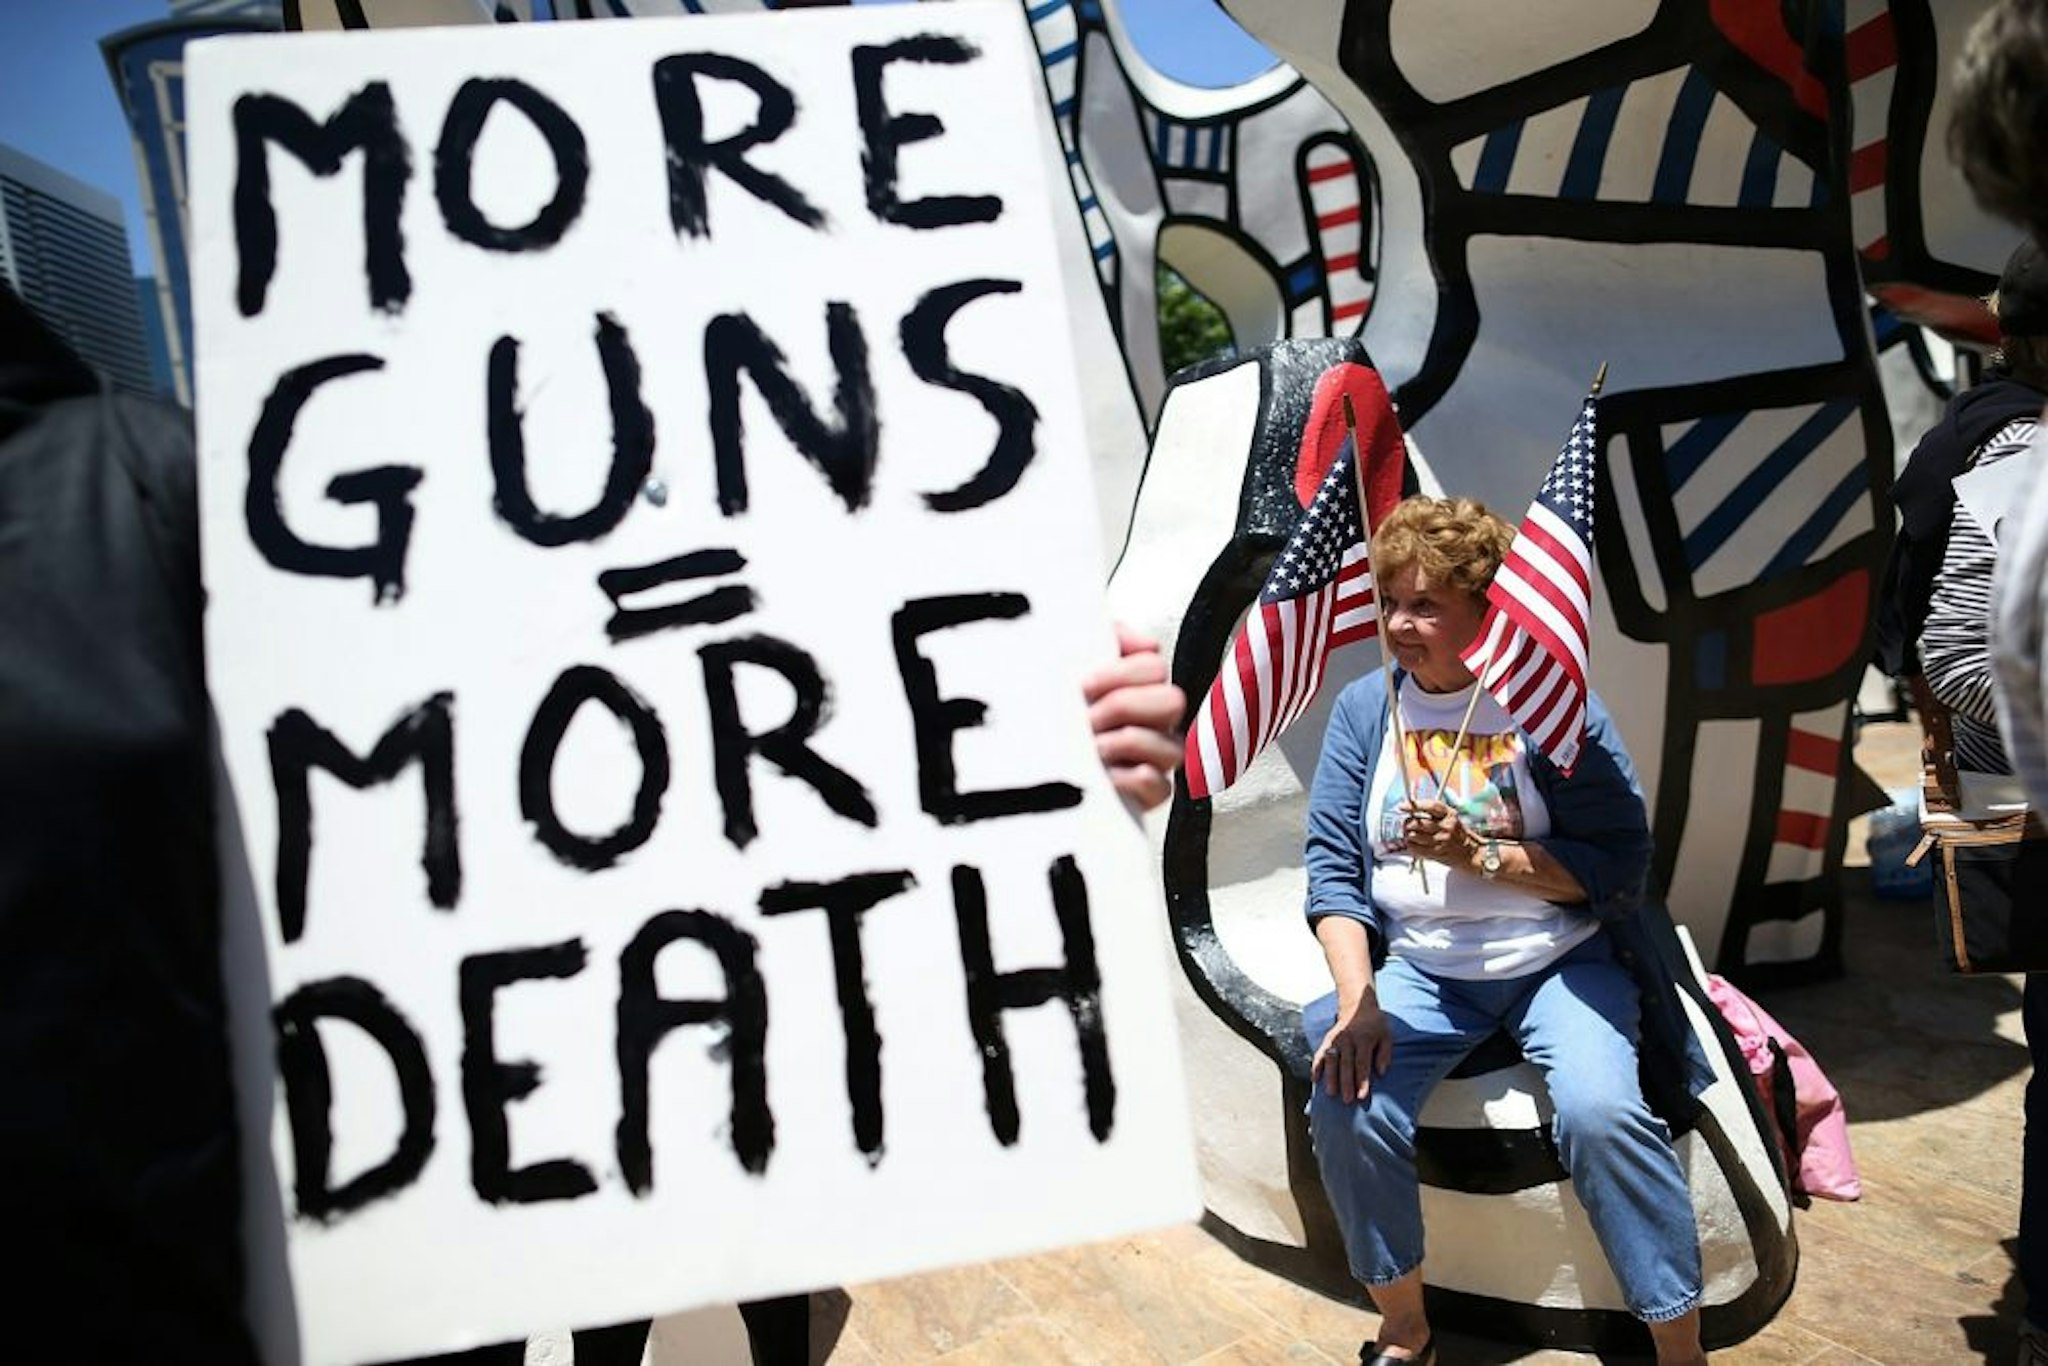 HOUSTON, TX - MAY 04: A protestor holds American flags during a demonstration in favor of gun regulation outside of the 2013 NRA Annual Meeting and Exhibits at the George R. Brown Convention Center on May 4, 2013 in Houston, Texas. More than 70,000 peope are expected to attend the NRA's 3-day annual meeting that features nearly 550 exhibitors, gun trade show and a political rally. The Show runs from May 3-5.